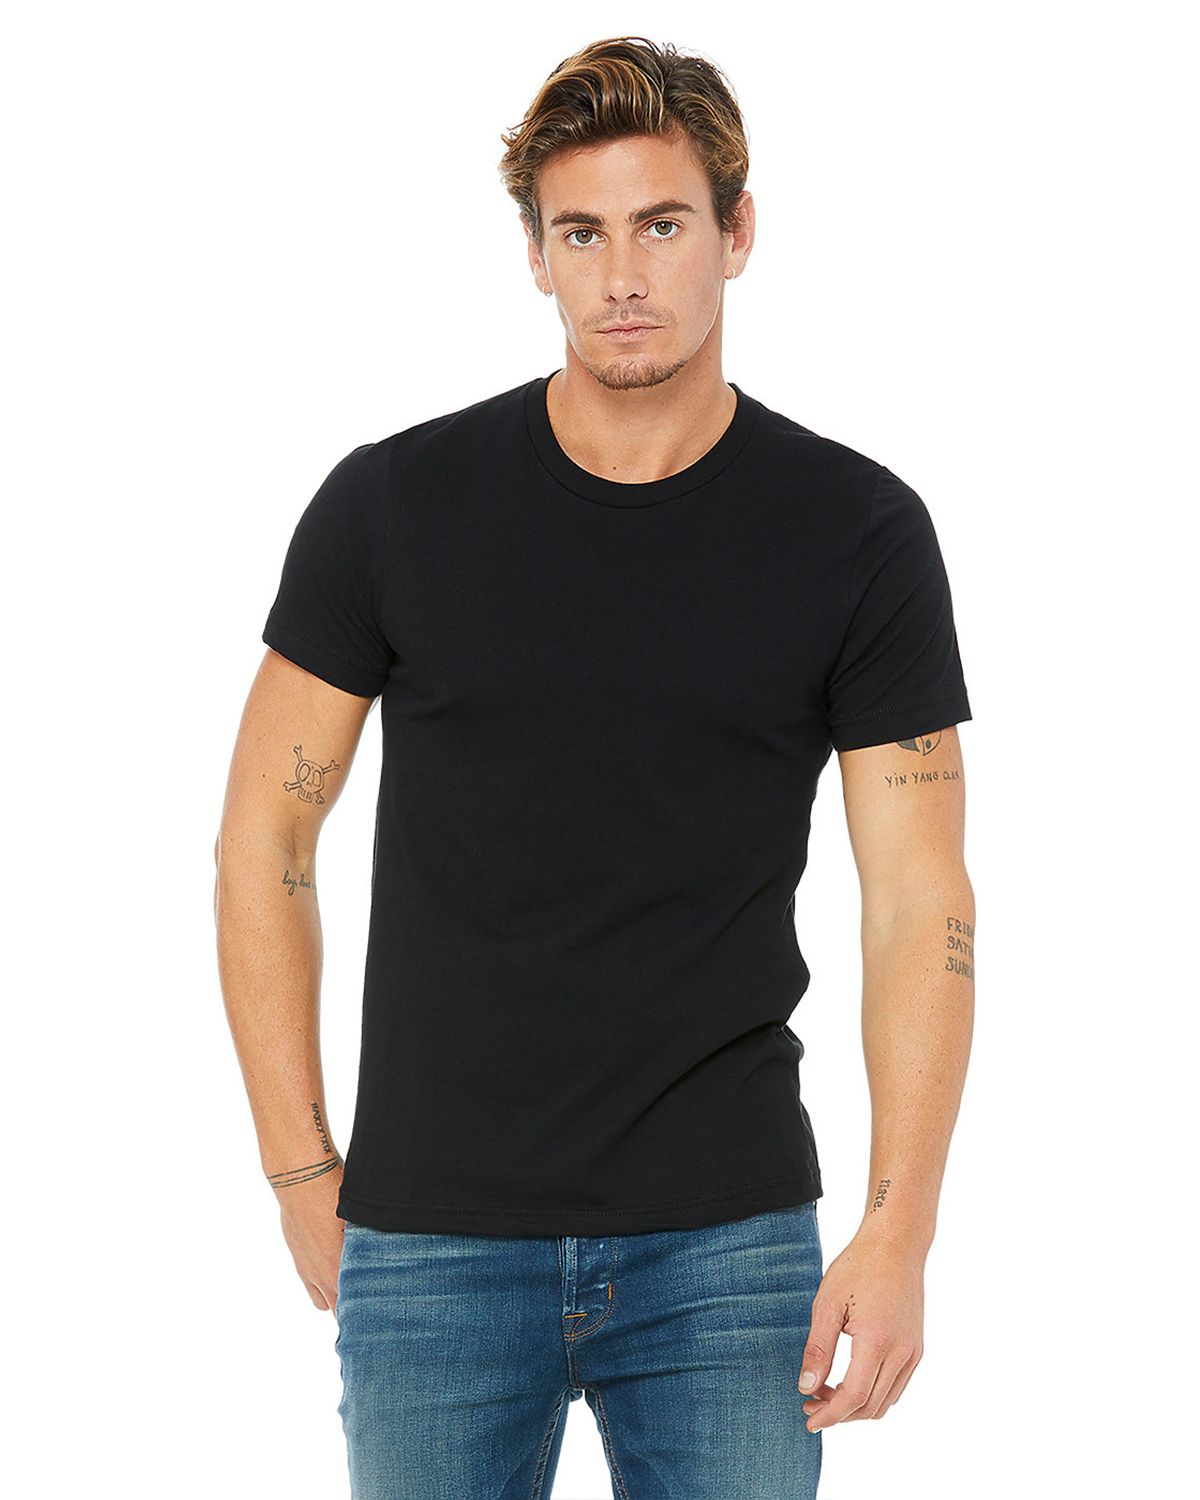 Reviews about Bella + Canvas 3001 Unisex Jersey Short-Sleeve Tee